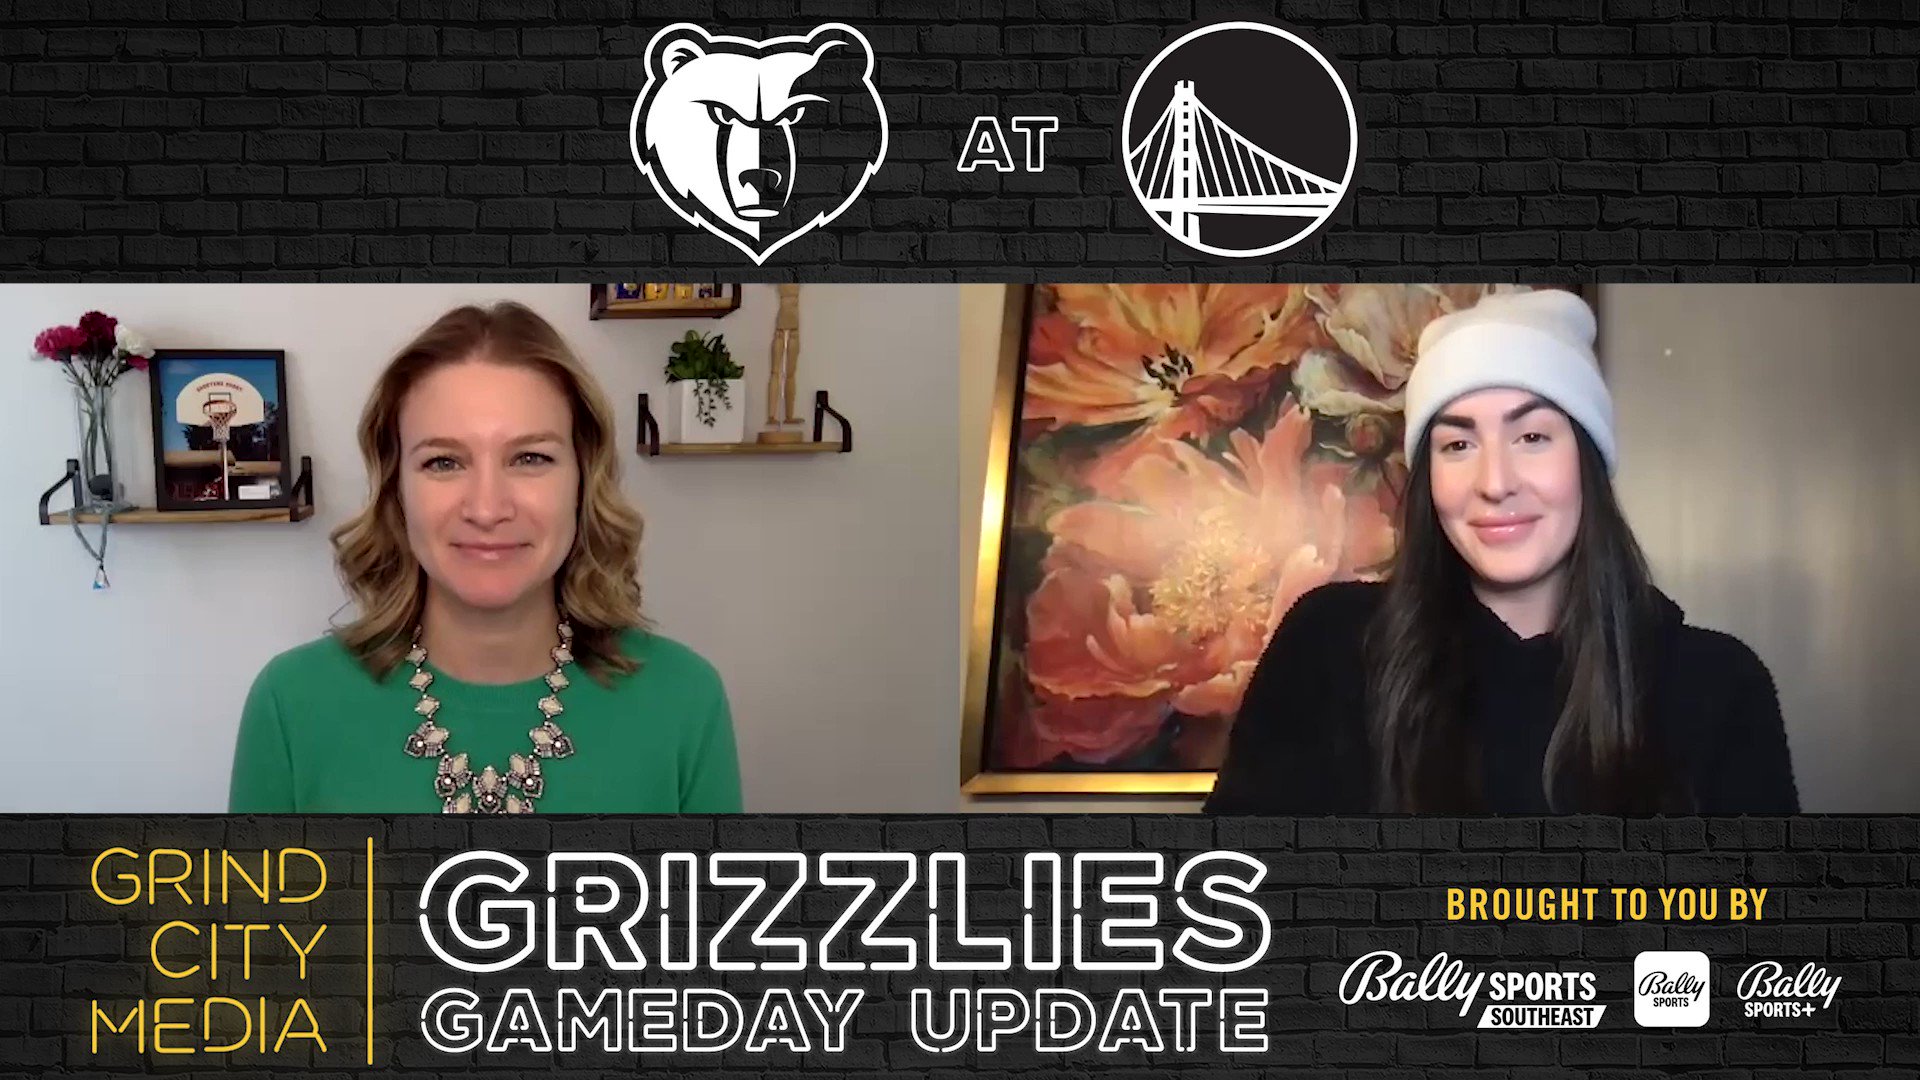 GritGrindGrizz: Grizz go against the grain with new uniforms